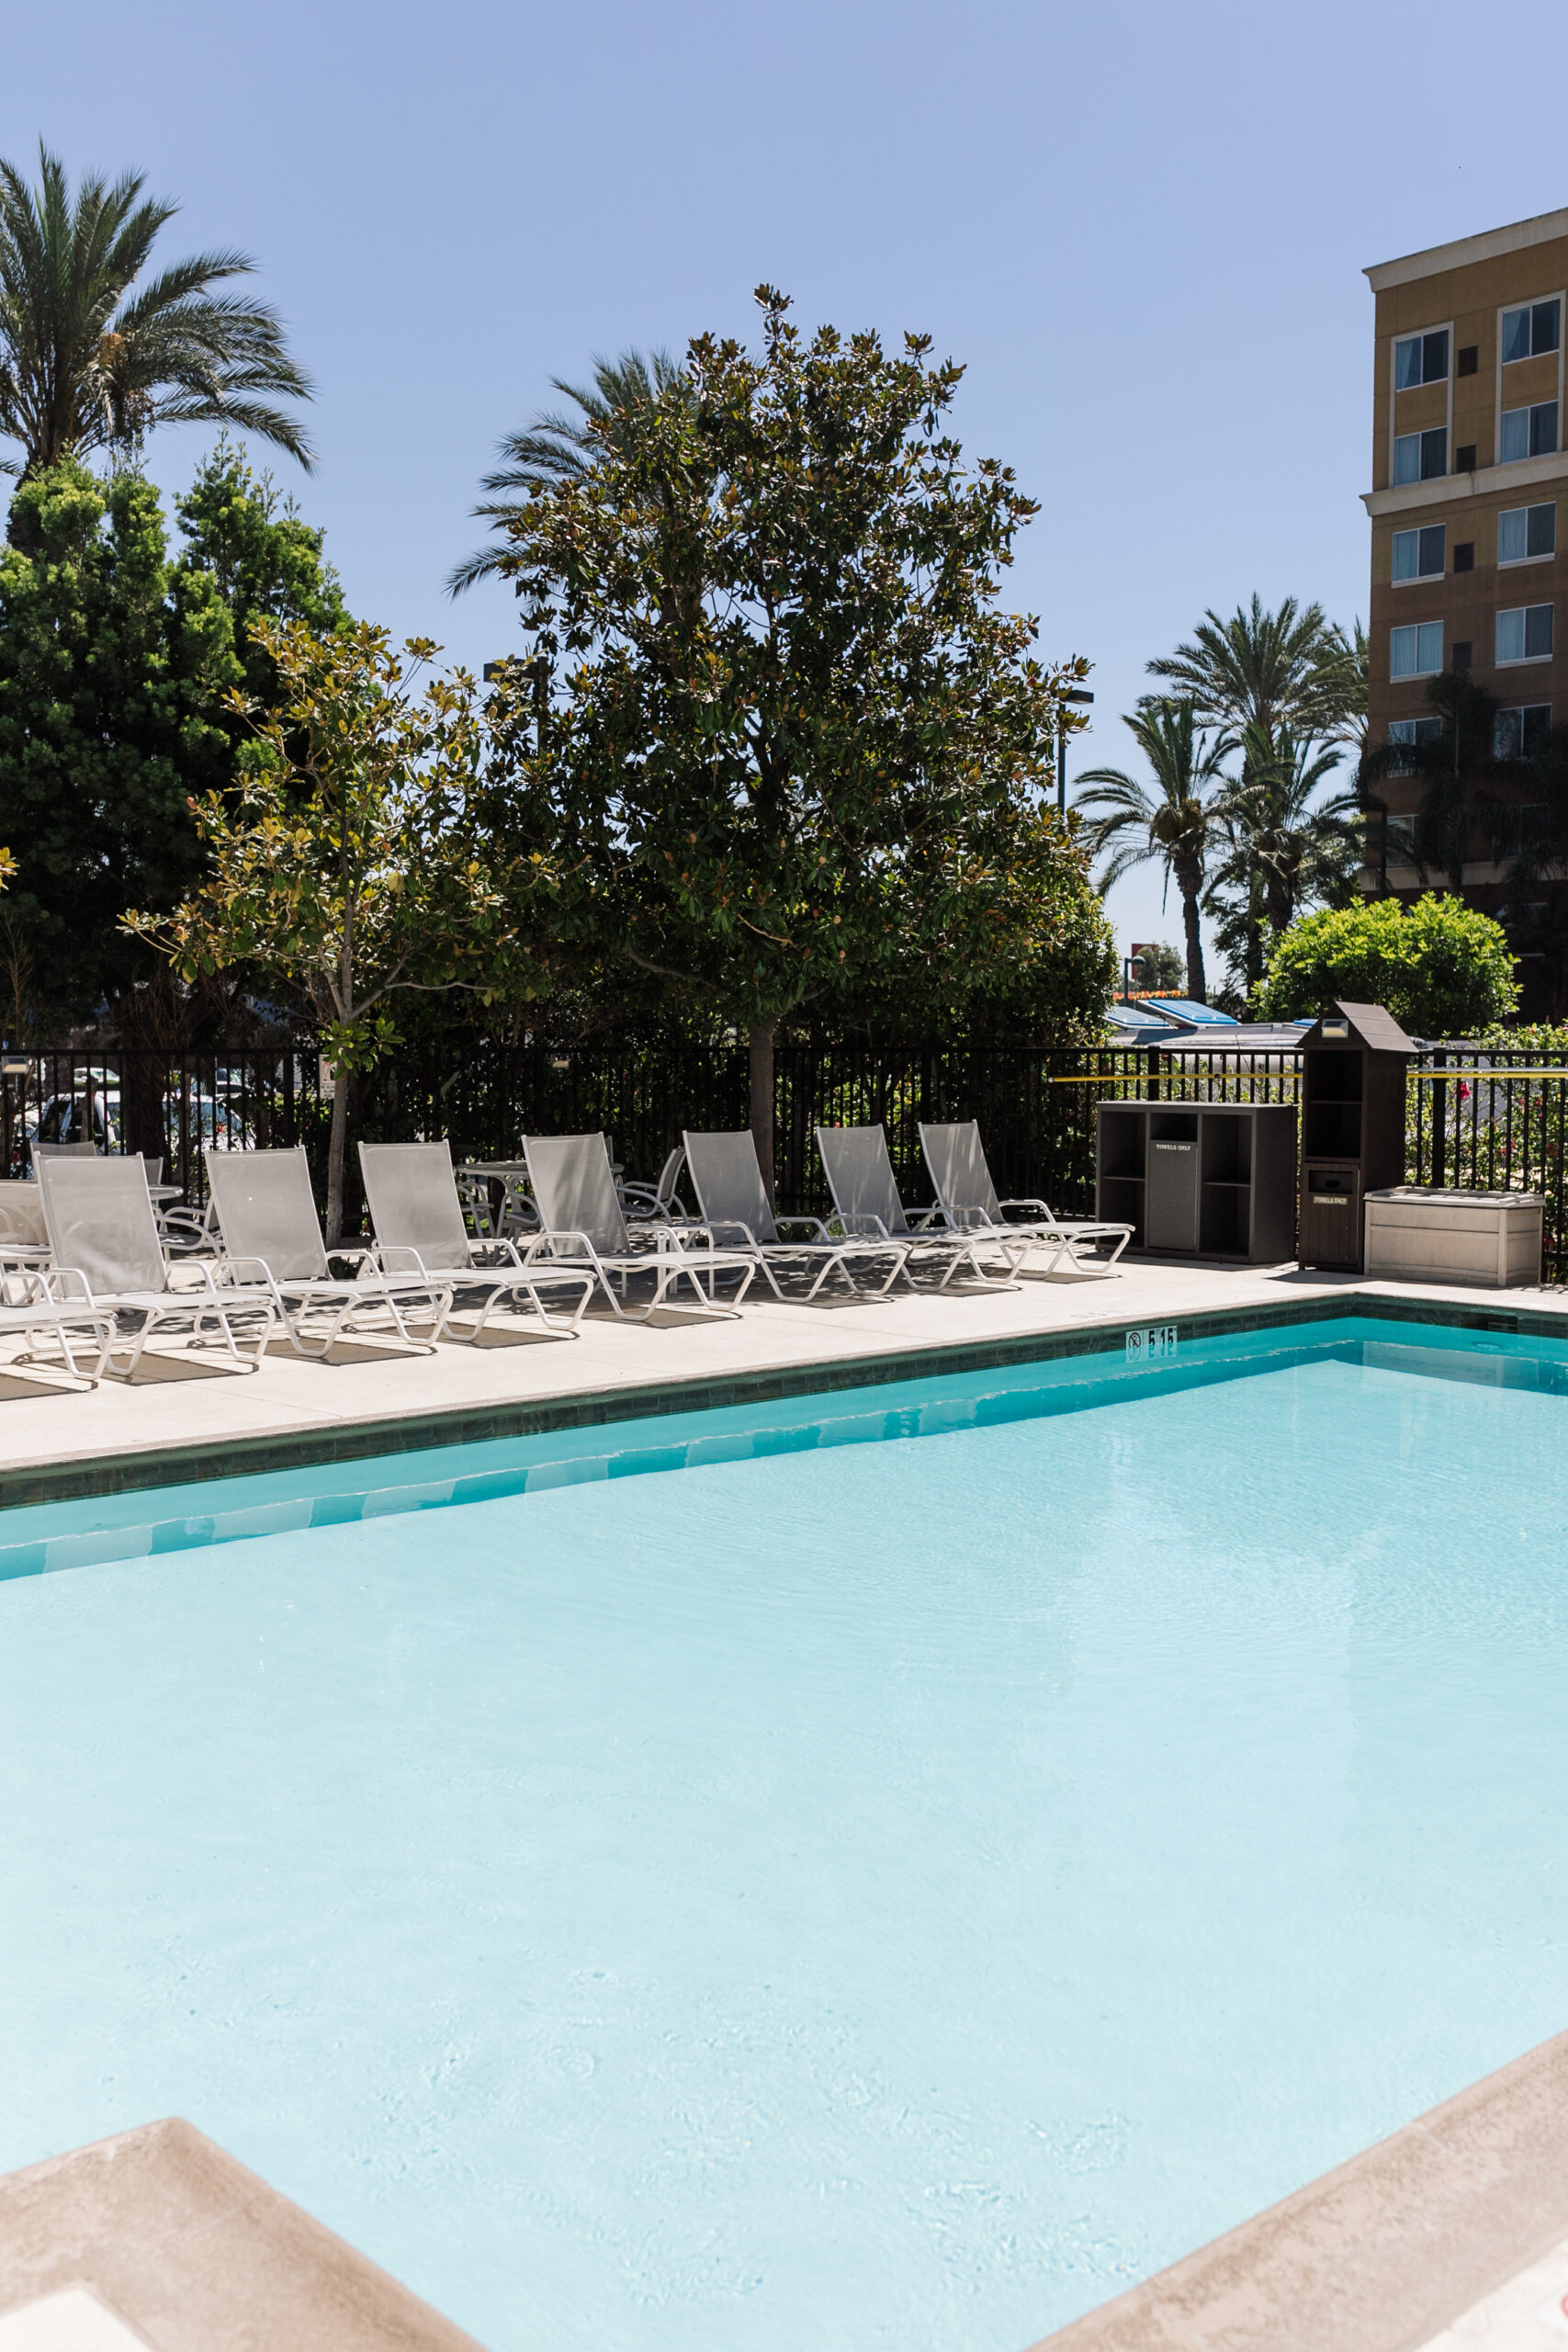 beautiful Pool area at the Hilton Garden Inn for your next Disneyland vacation